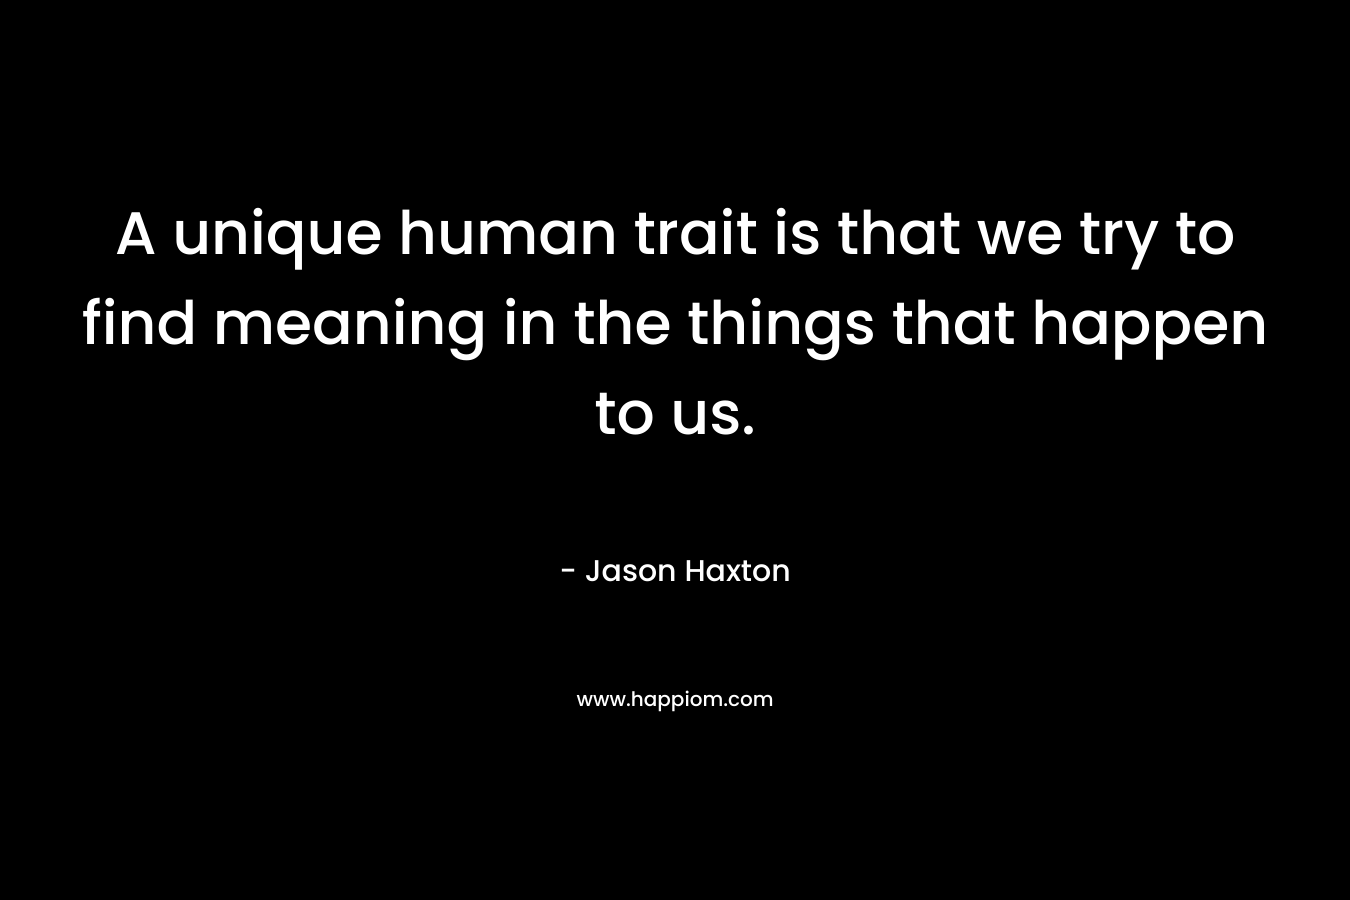 A unique human trait is that we try to find meaning in the things that happen to us. – Jason Haxton